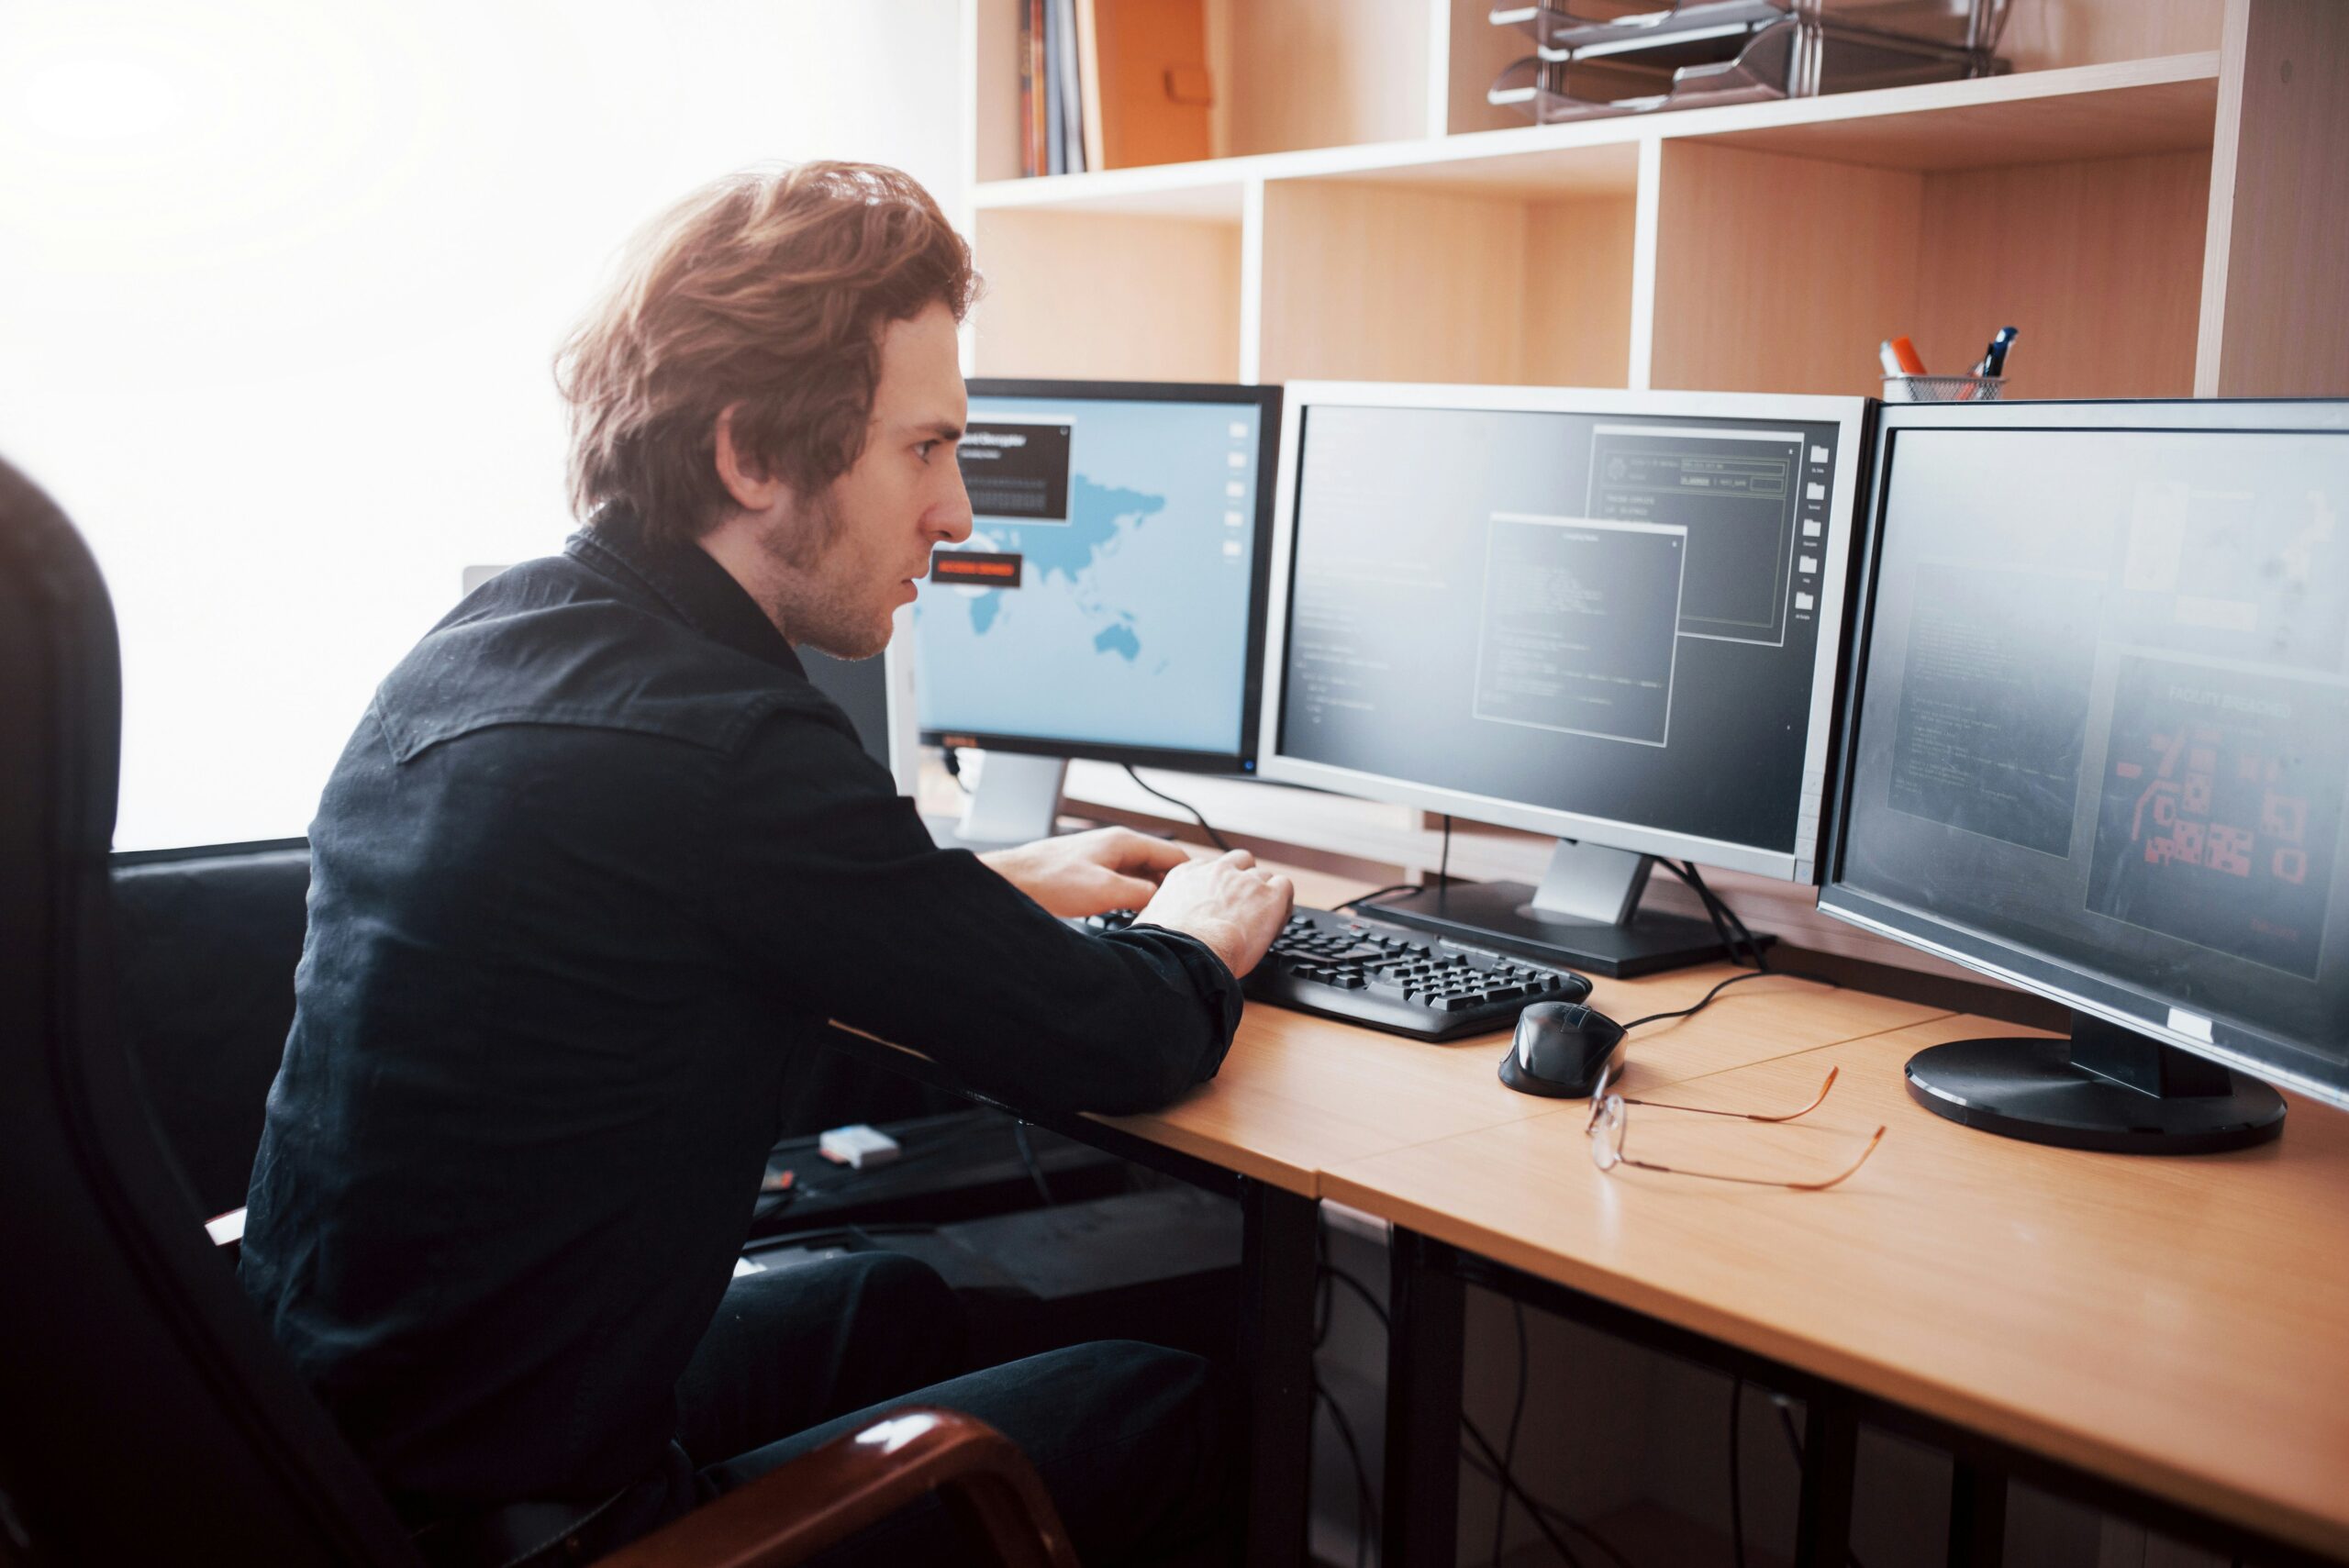 A man sitting at a desk, diligently monitoring multiple computer screens to survive potential cyber attacks.